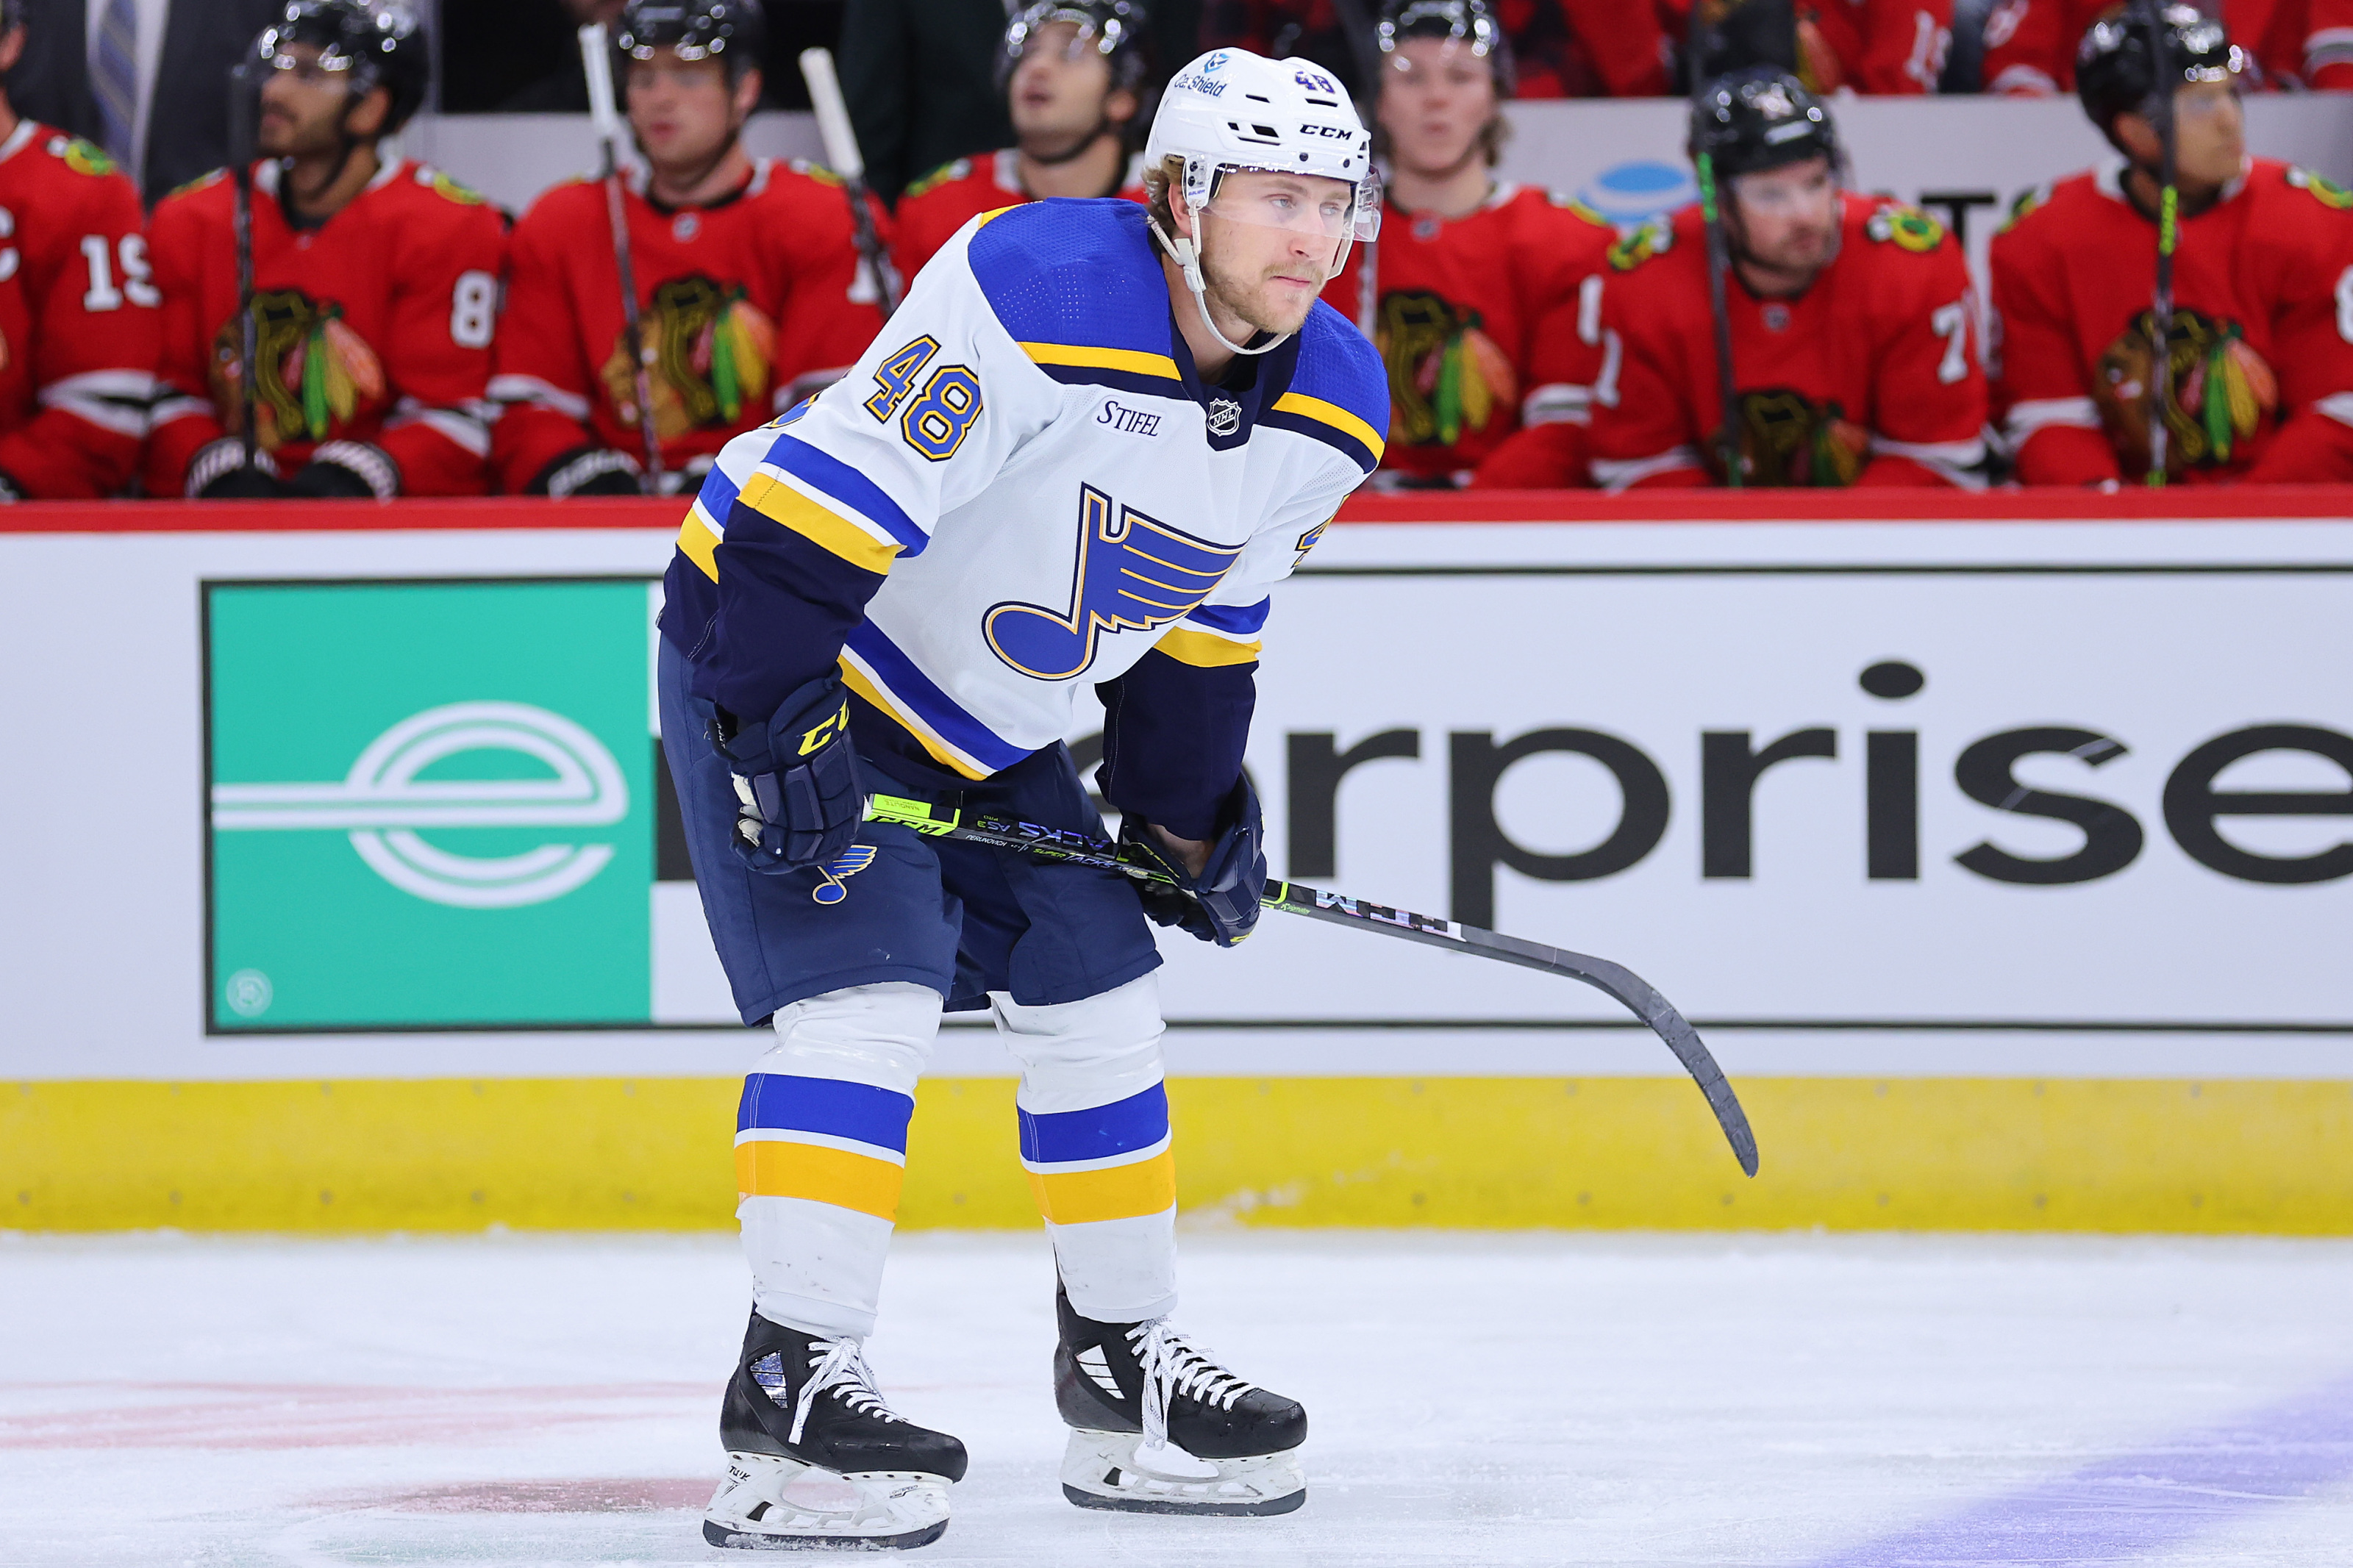 St. Louis Blues on X: THE TEAM THAT FINALLY DID IT